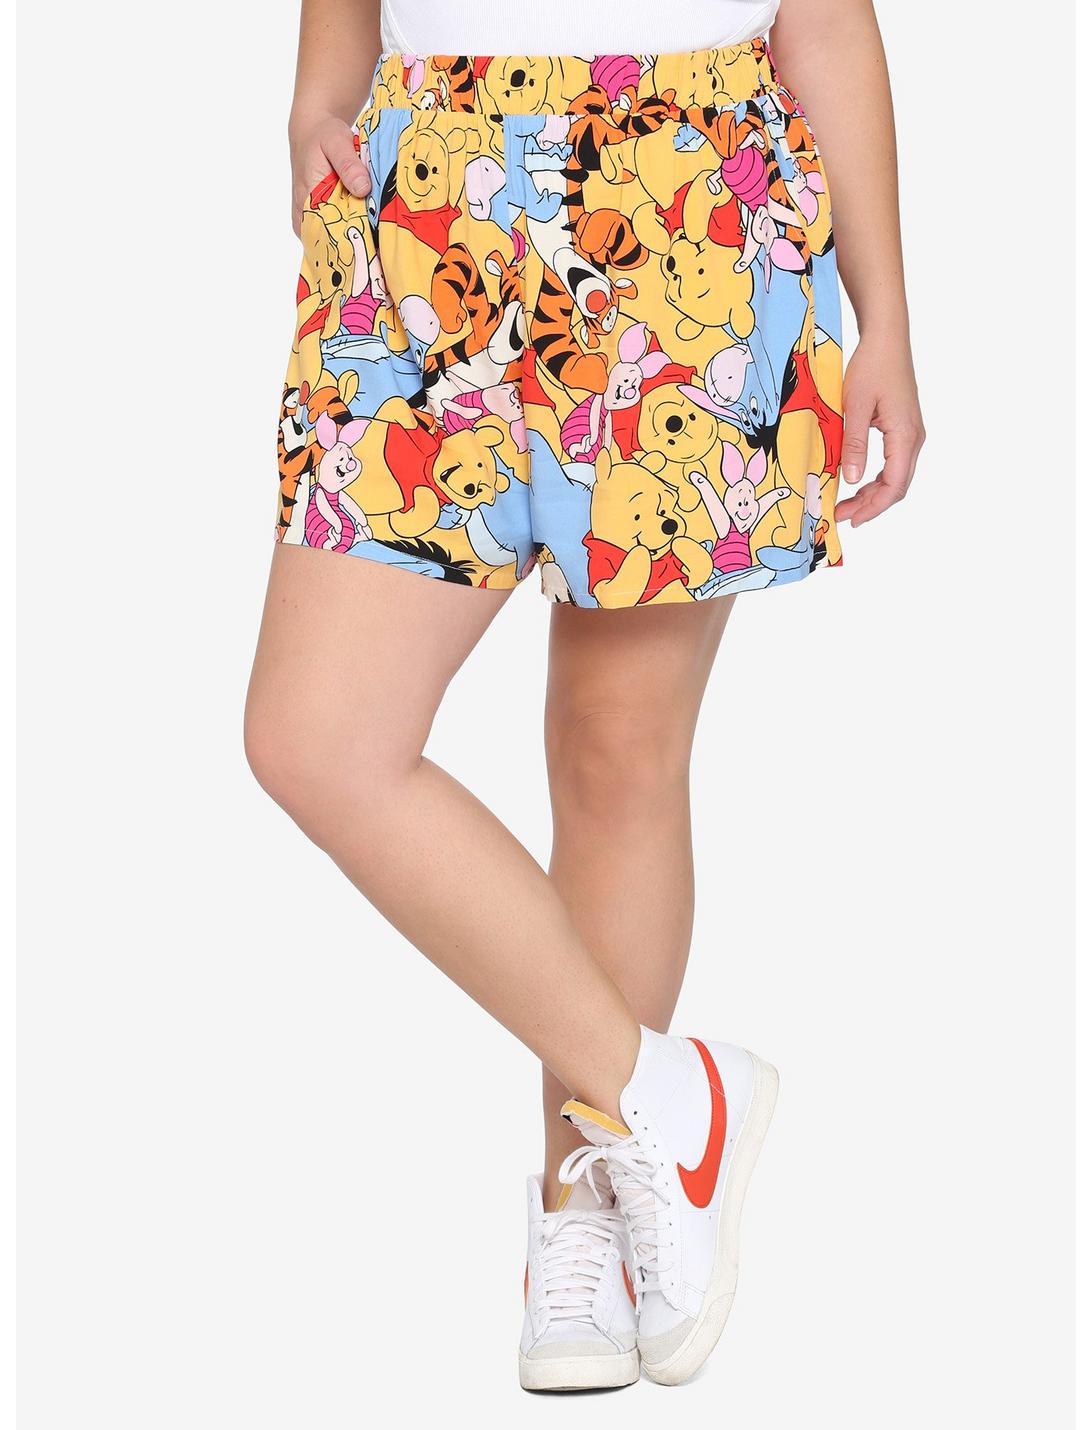 Disney Winnie The Pooh Allover Character Girls Resort Shorts Plus Size, MULTI, hi-res